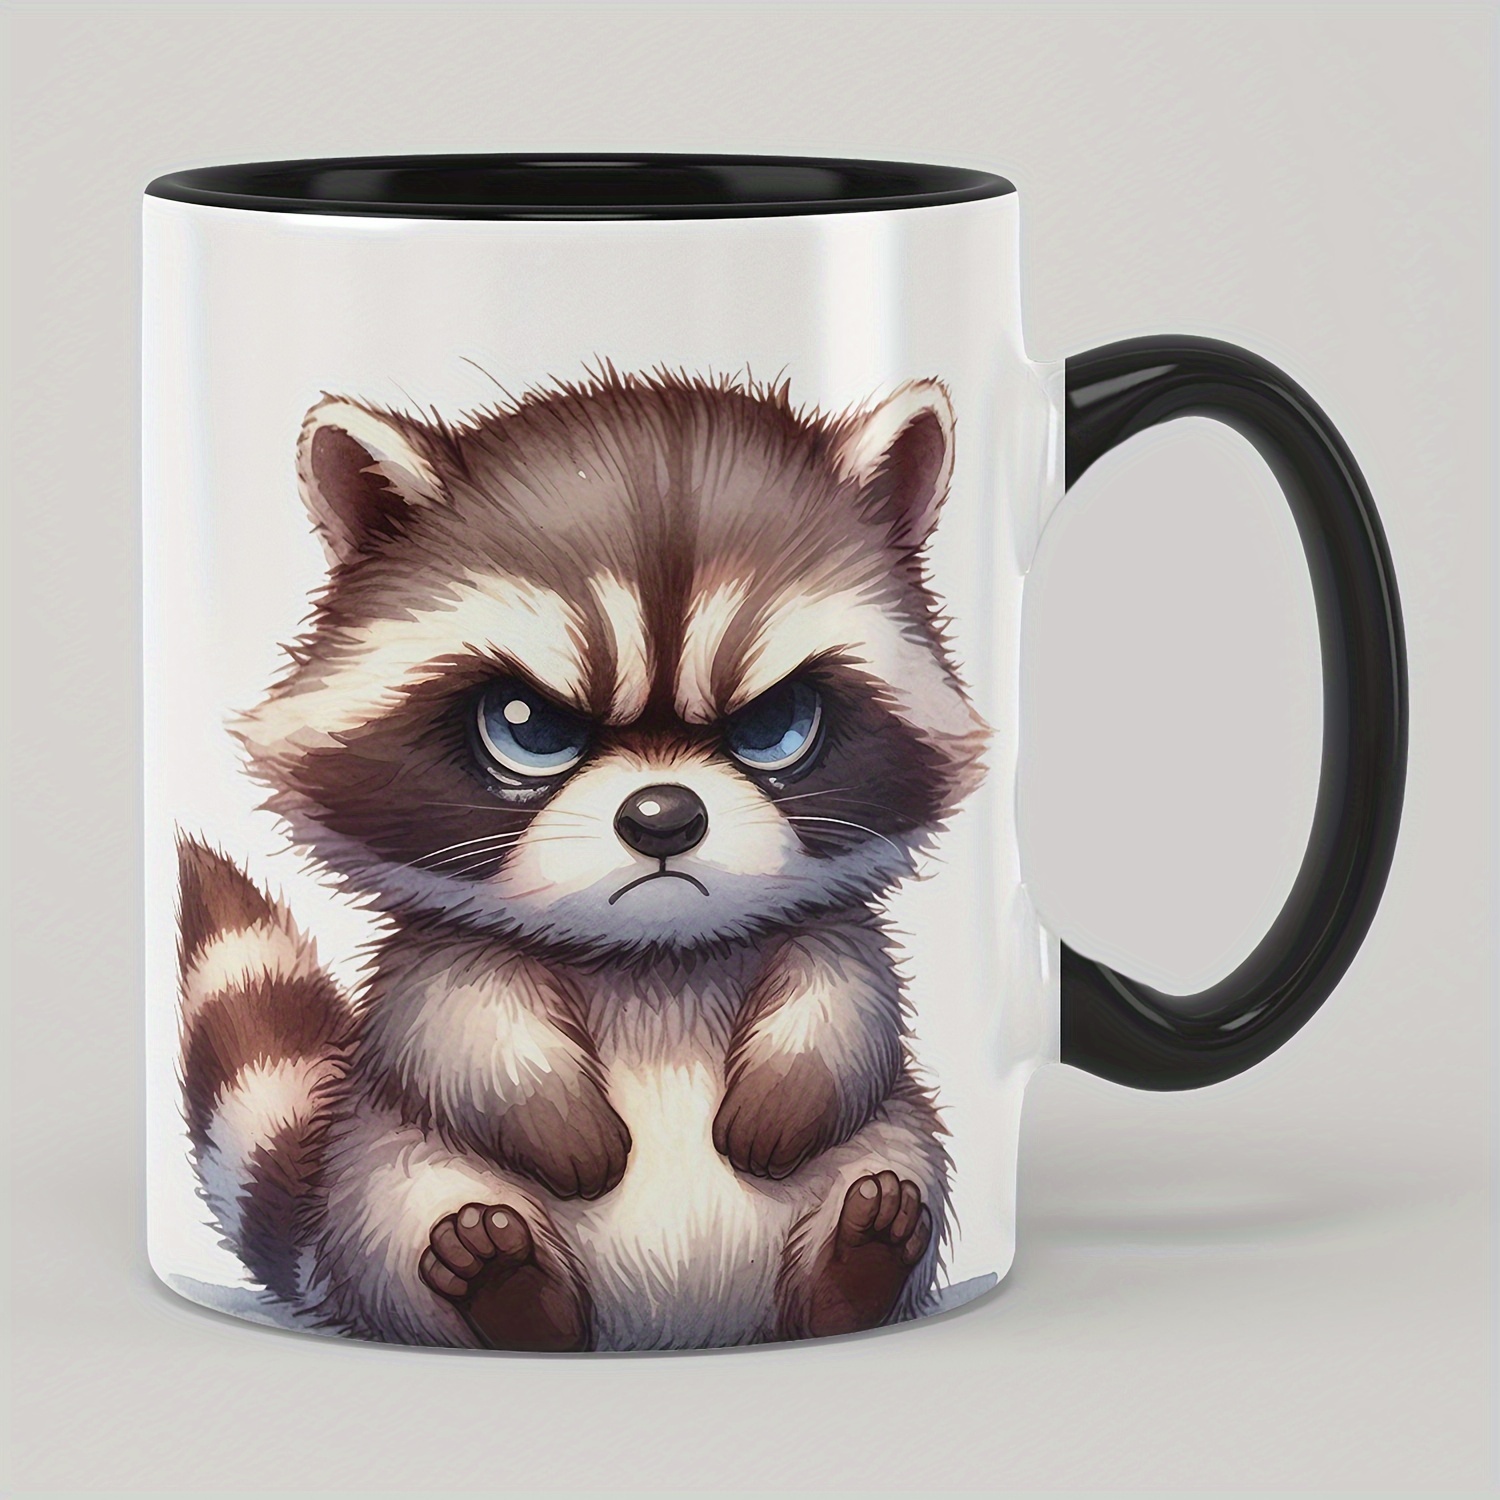 

11oz Ceramic Coffee Mug With Handle, Large Raccoon Print - Novelty Gift Cup For Hot/cold Beverages, Ideal For Halloween, Christmas, Weddings, Birthdays, Valentine's Day